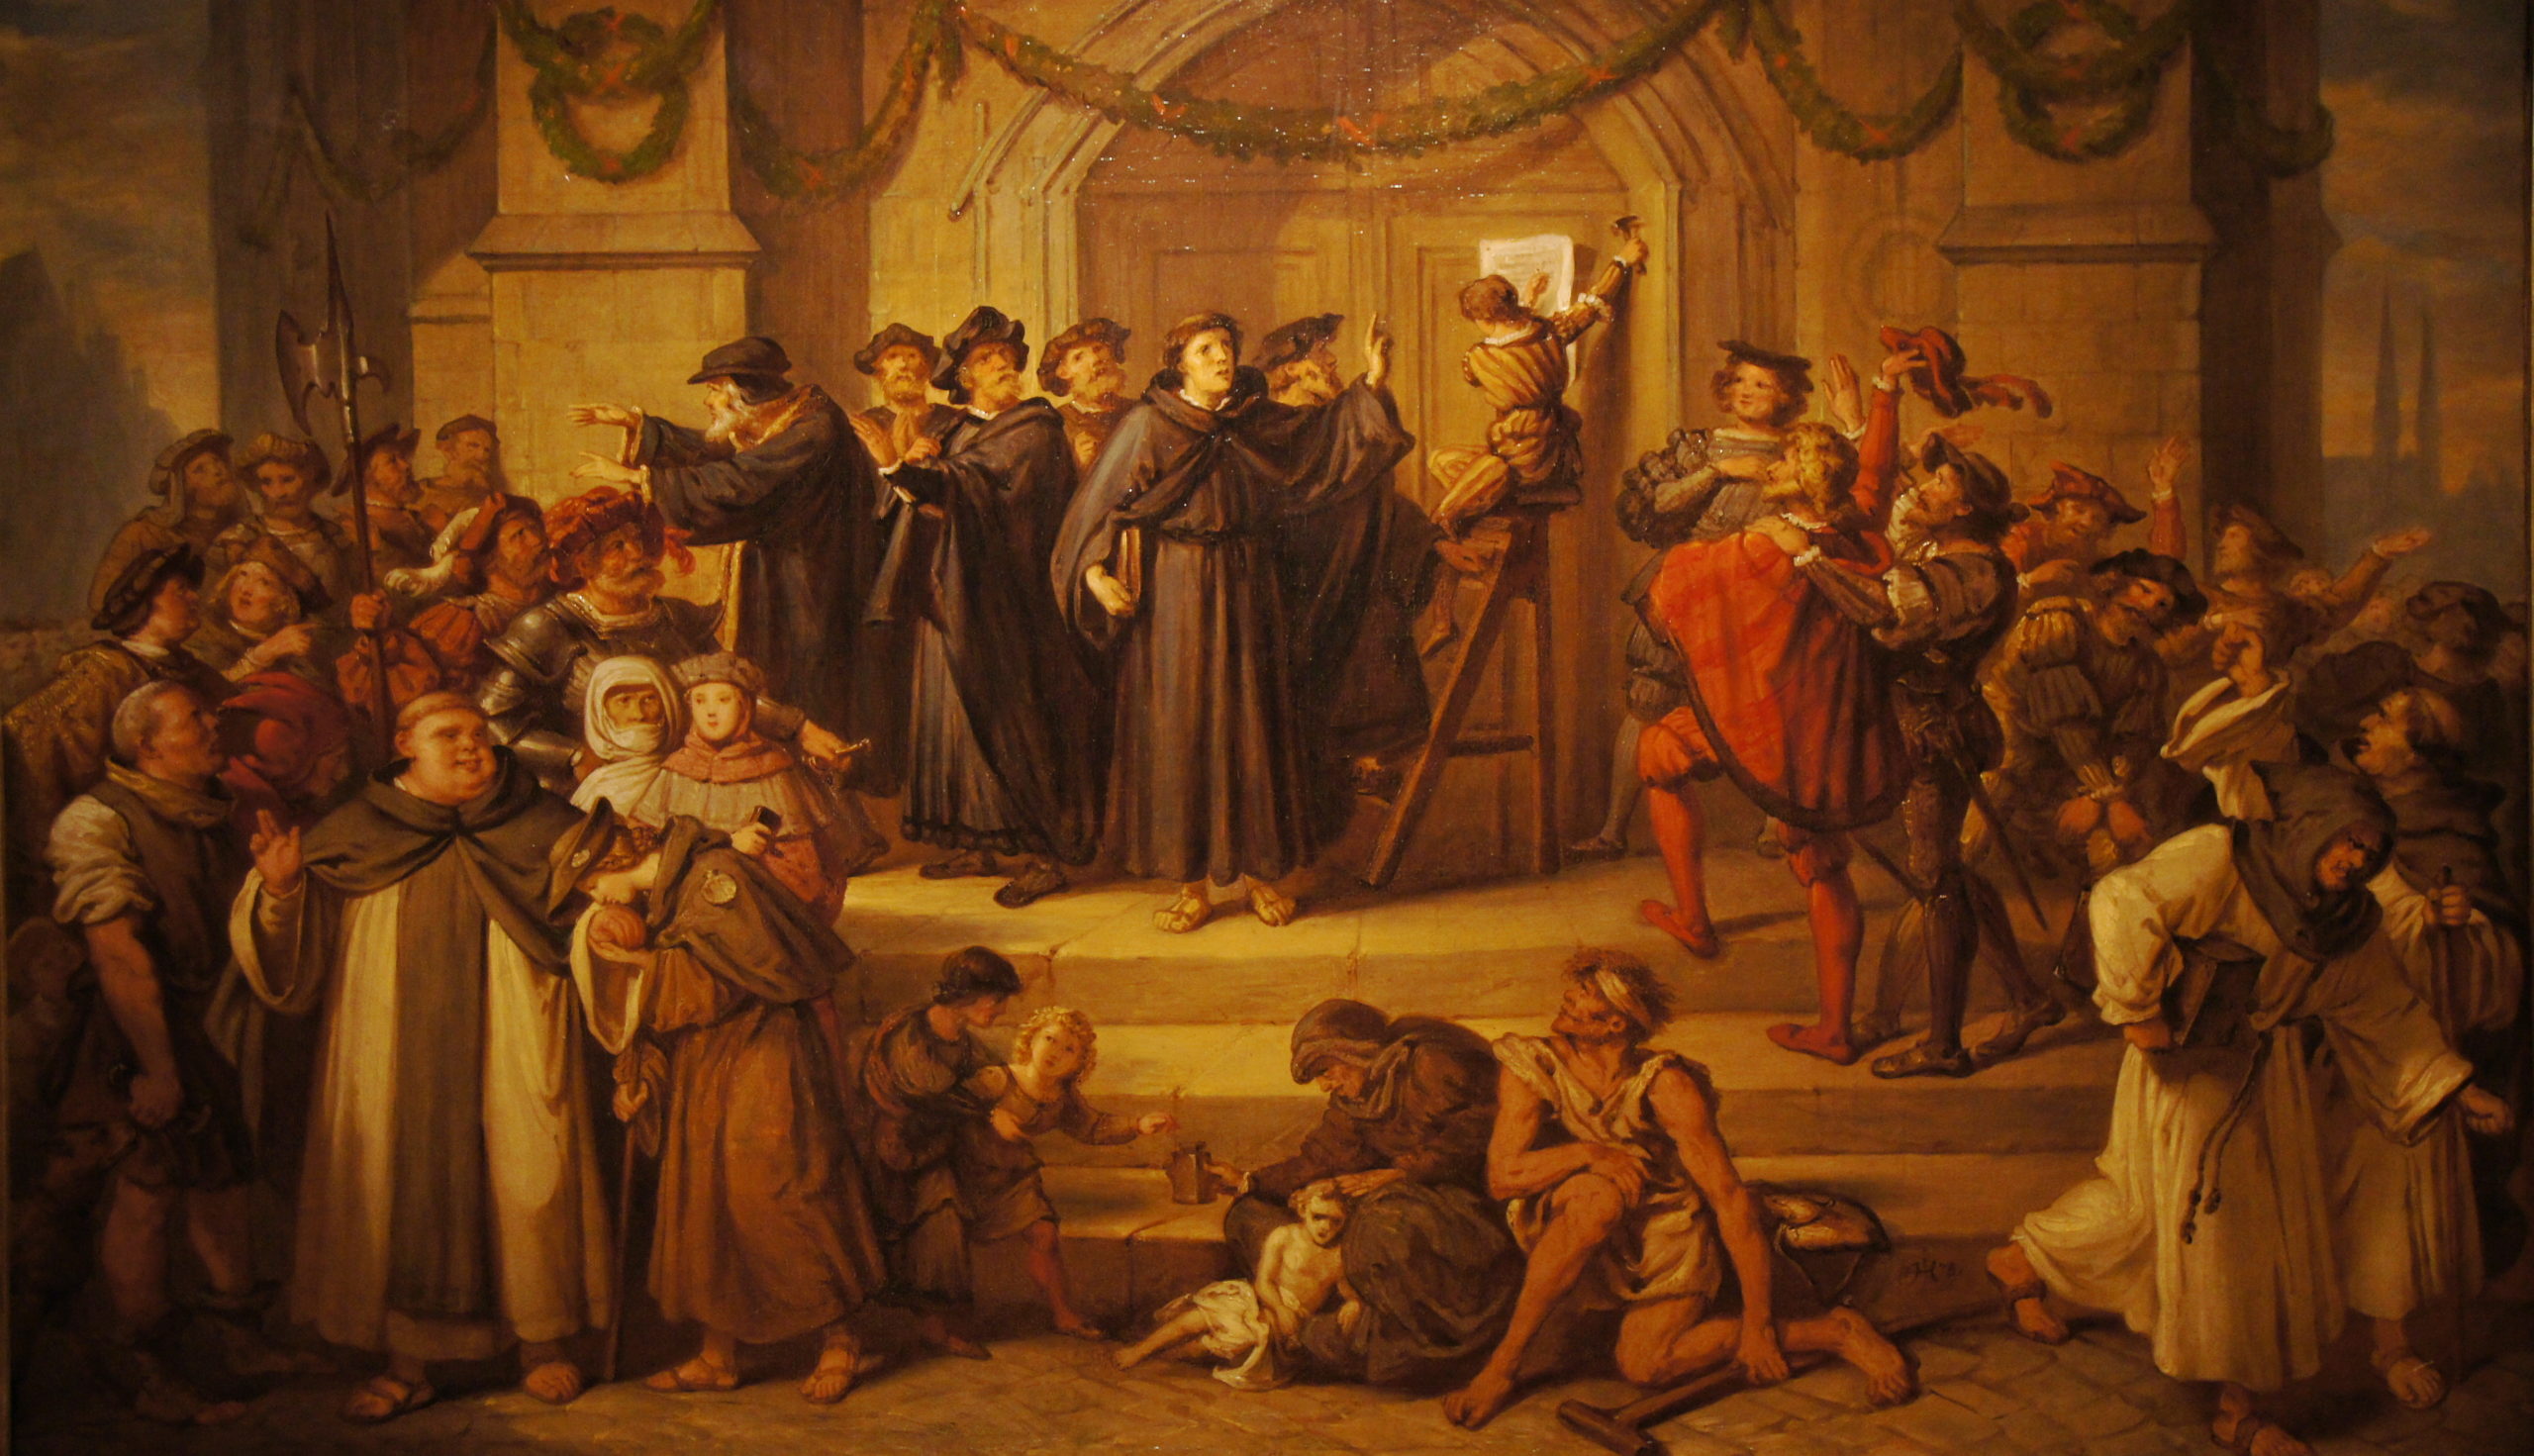 martin luther's 95 theses started which movement